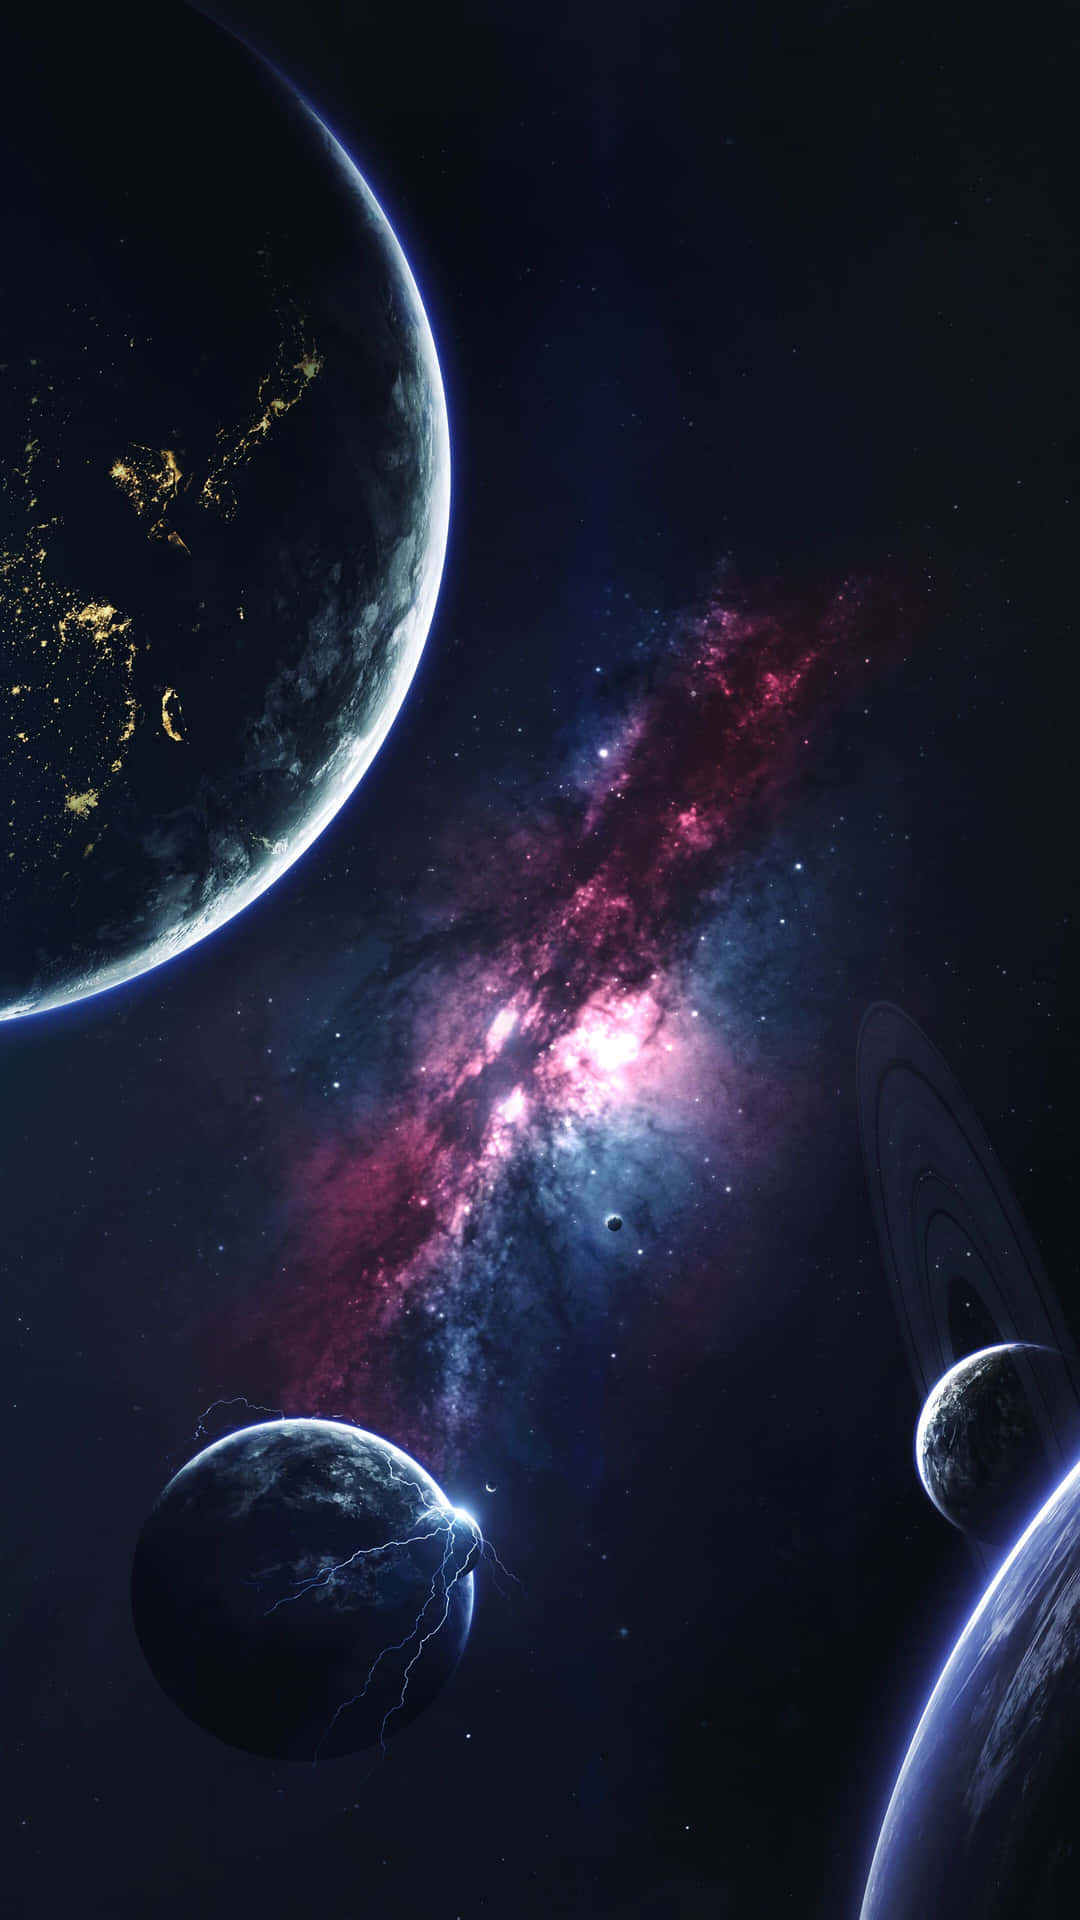 A Space Scene With Planets And Stars